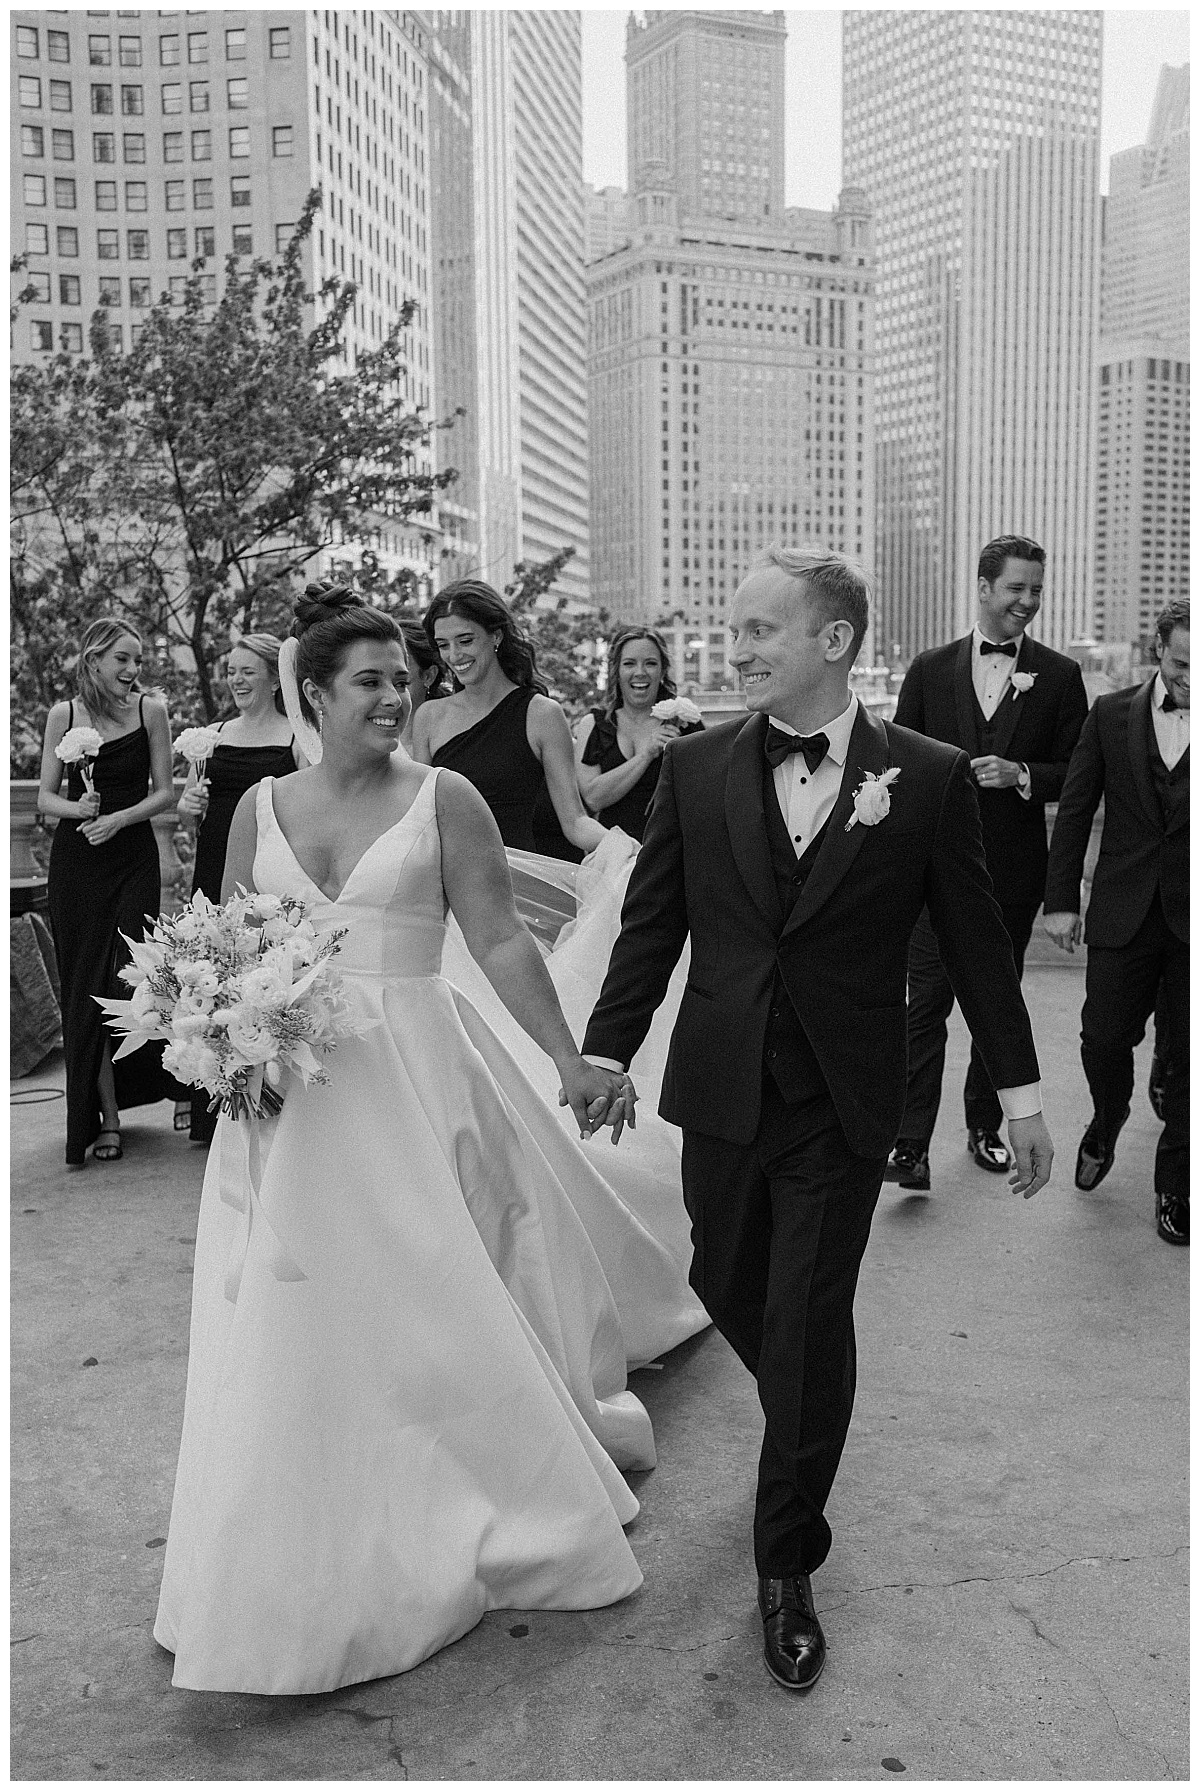 newlyweds walk down sidewalk followed by bridesmaids and groomsmen by Chicago photographer